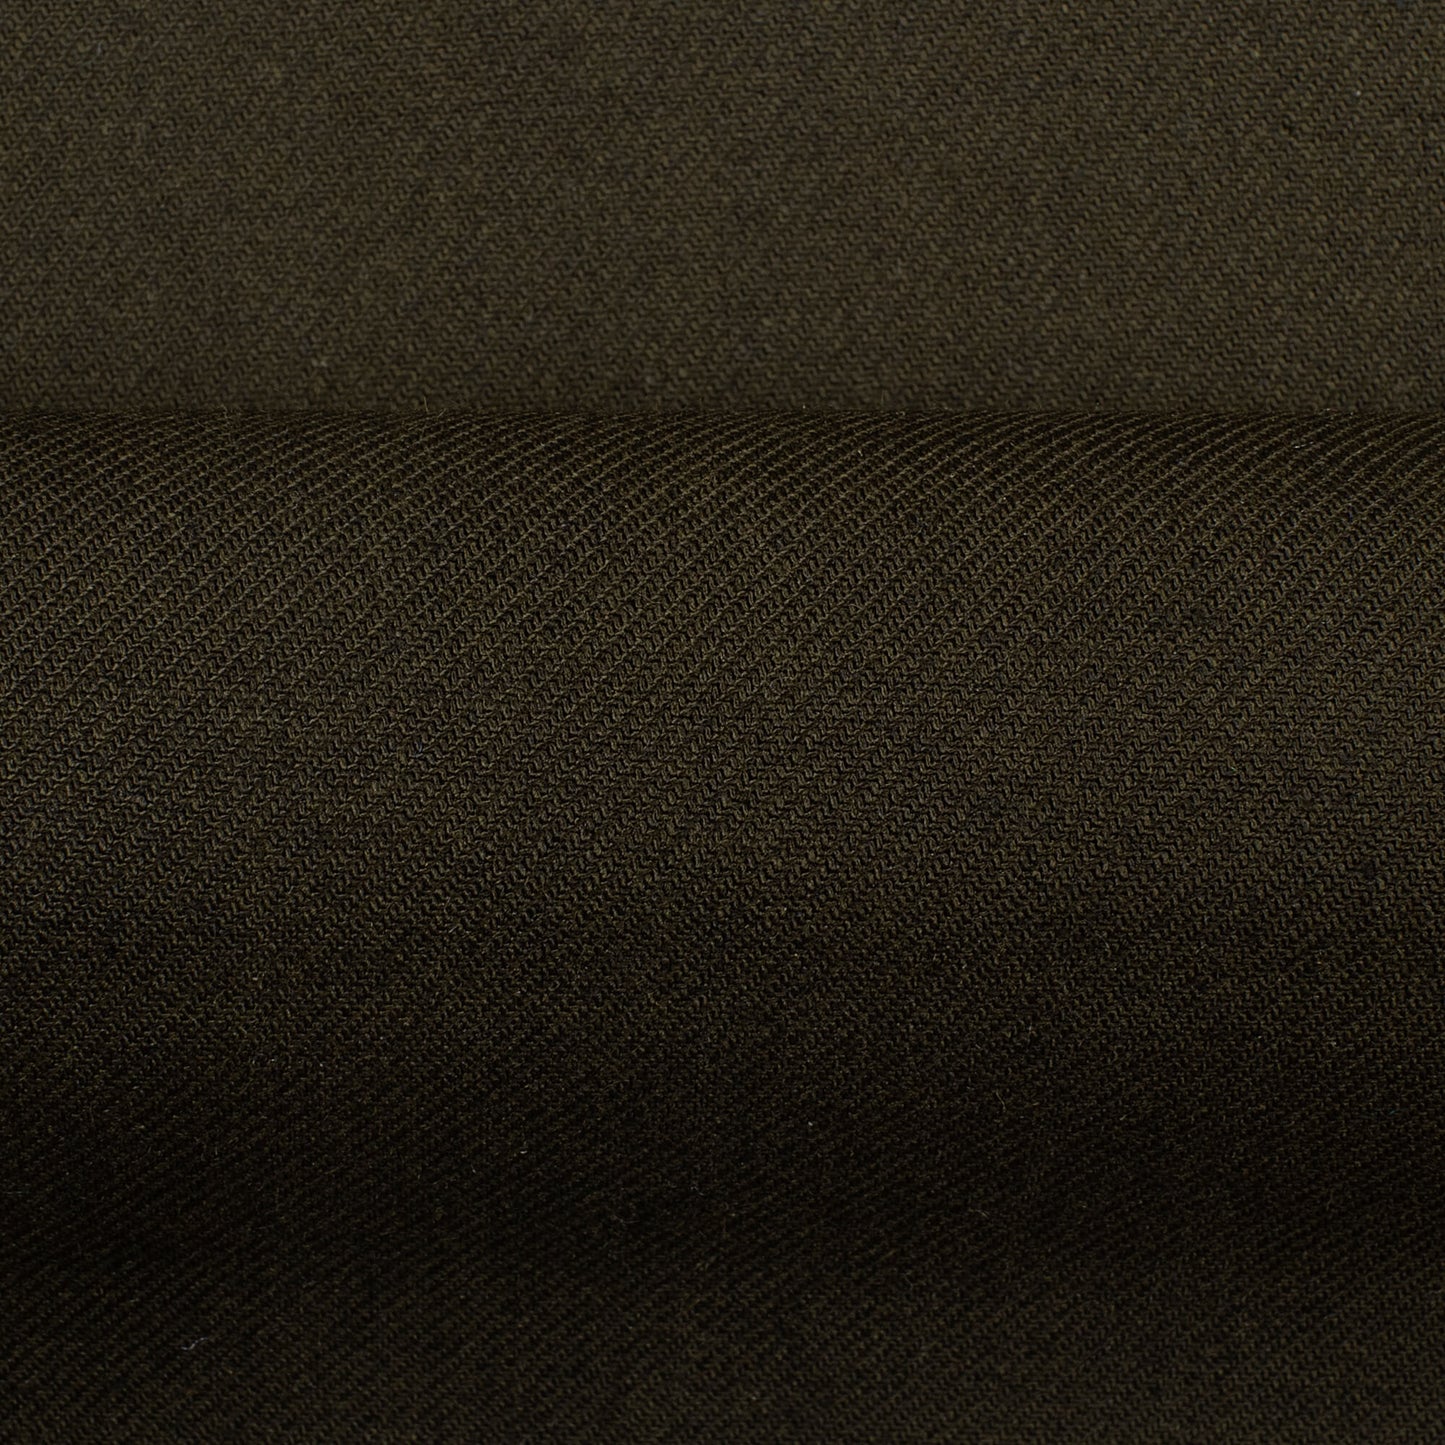 Seaweed Green Plain Luxury Suiting Fabric (Width 58 Inches)